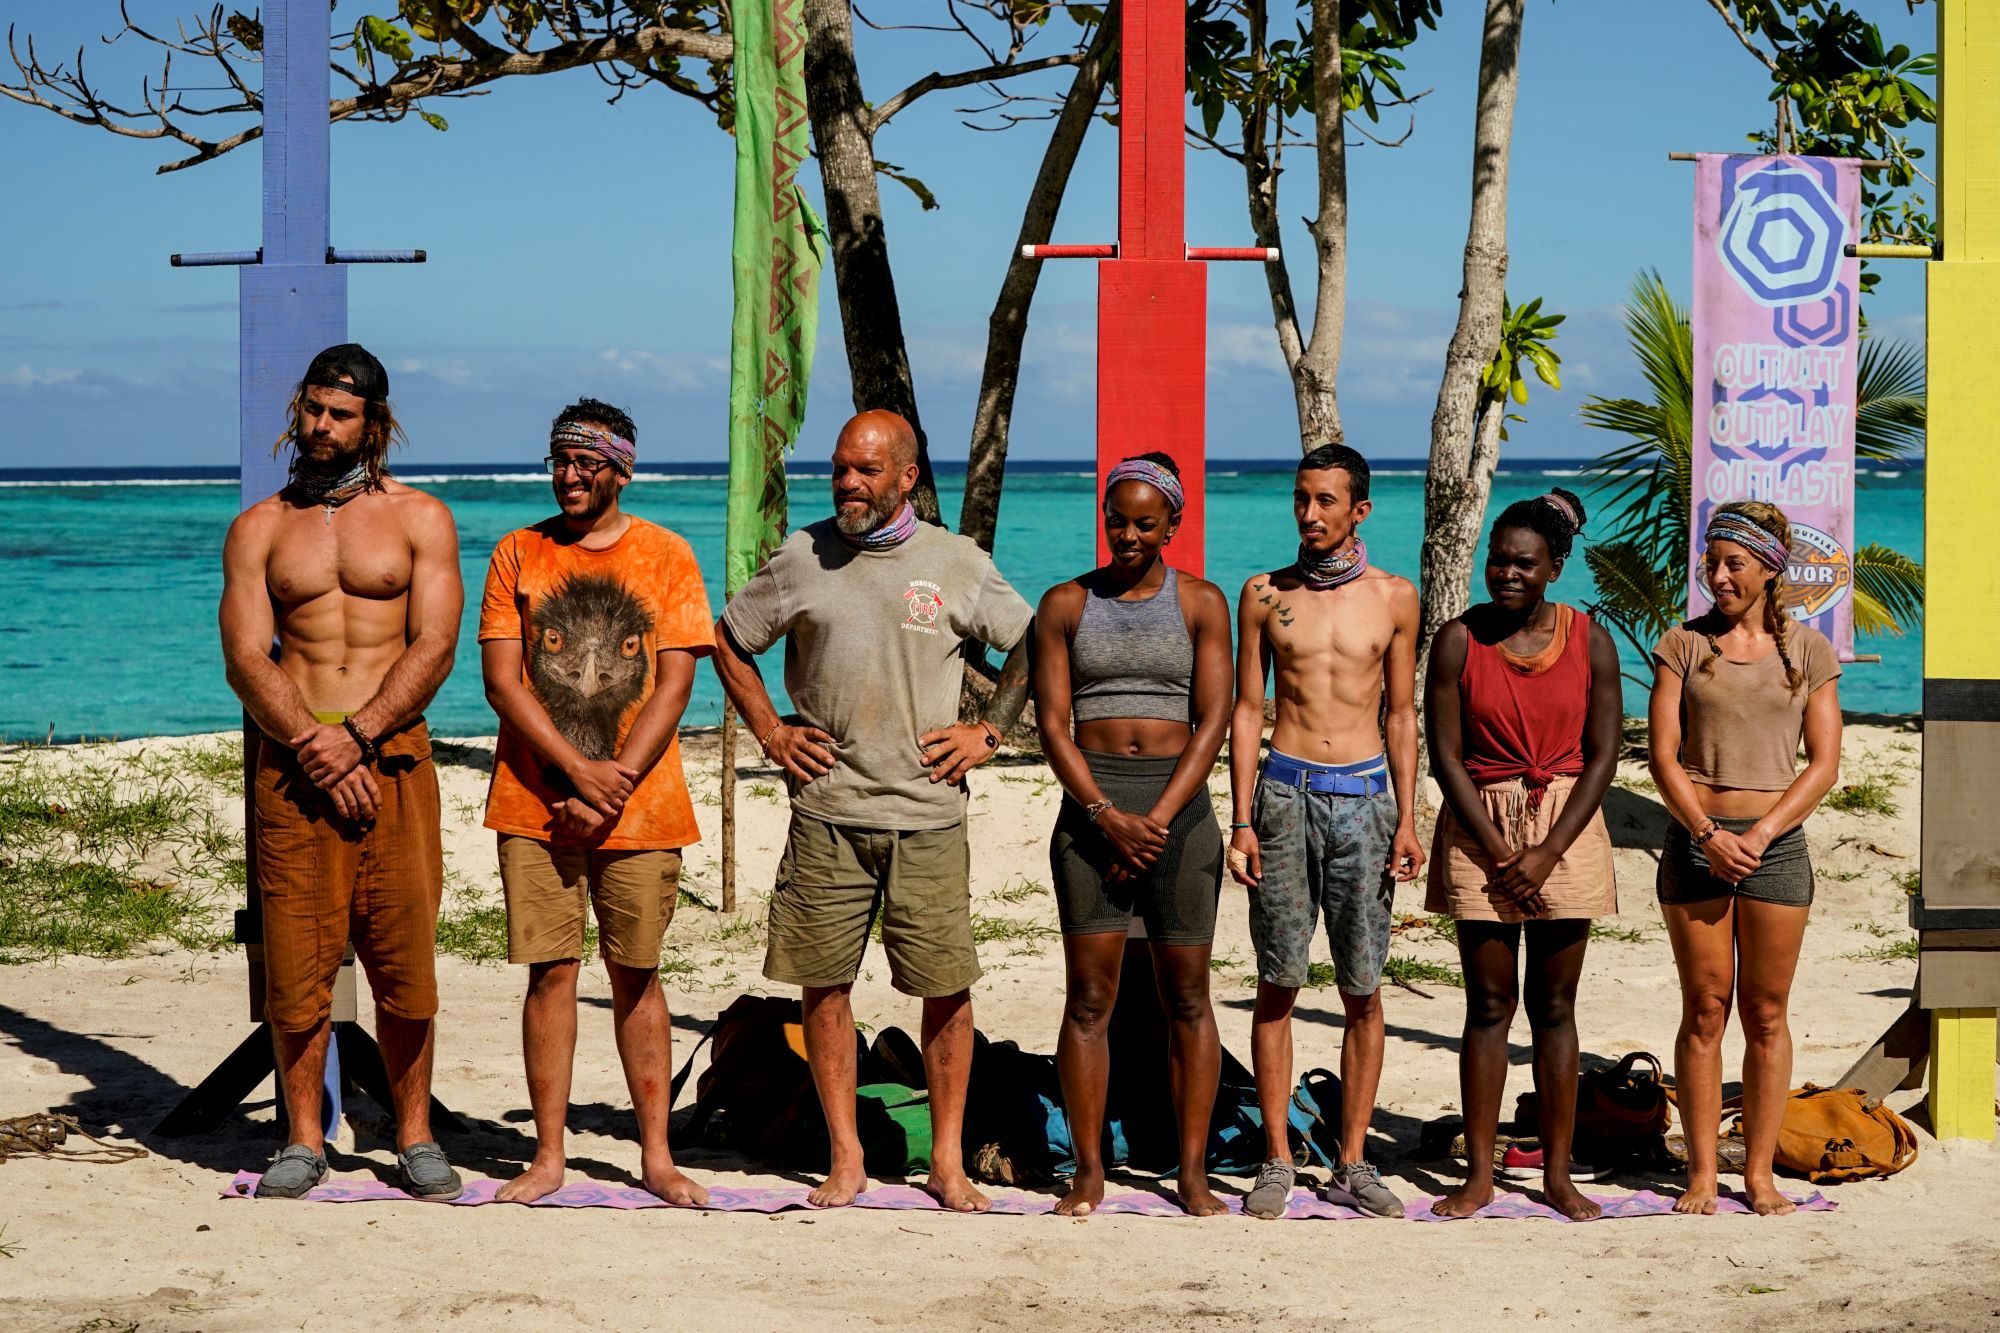 The final seven of the 'Survivor' Season 42 cast, including the winner, listen to instructions regarding the next immunity challenge. The remaining castaways include Jonathan Young, Omar Zaheer, Mike Turner, Drea Wheeler, Romeo Escobar, Maryanne Oketch, and Lindsay Dolashewich.